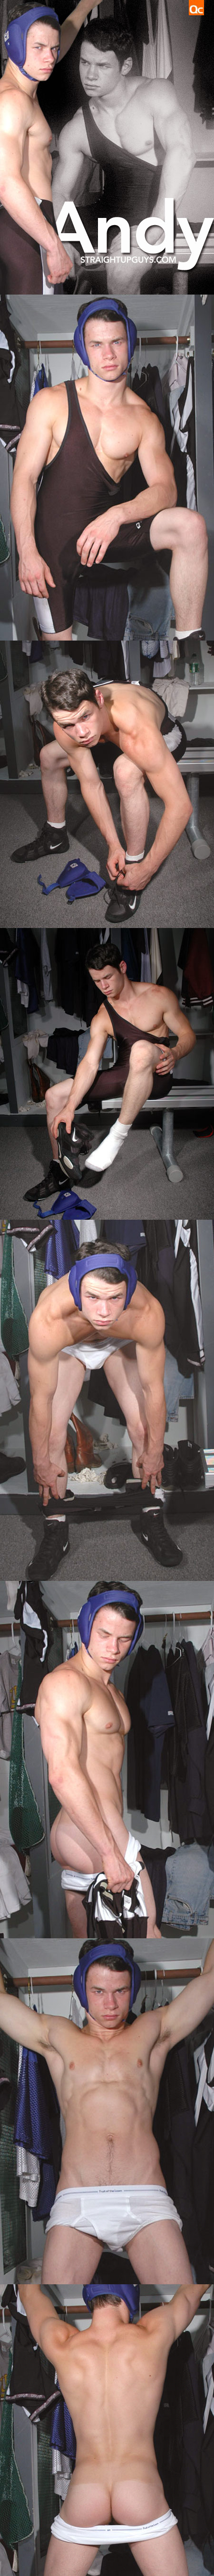 in and out of a singlet